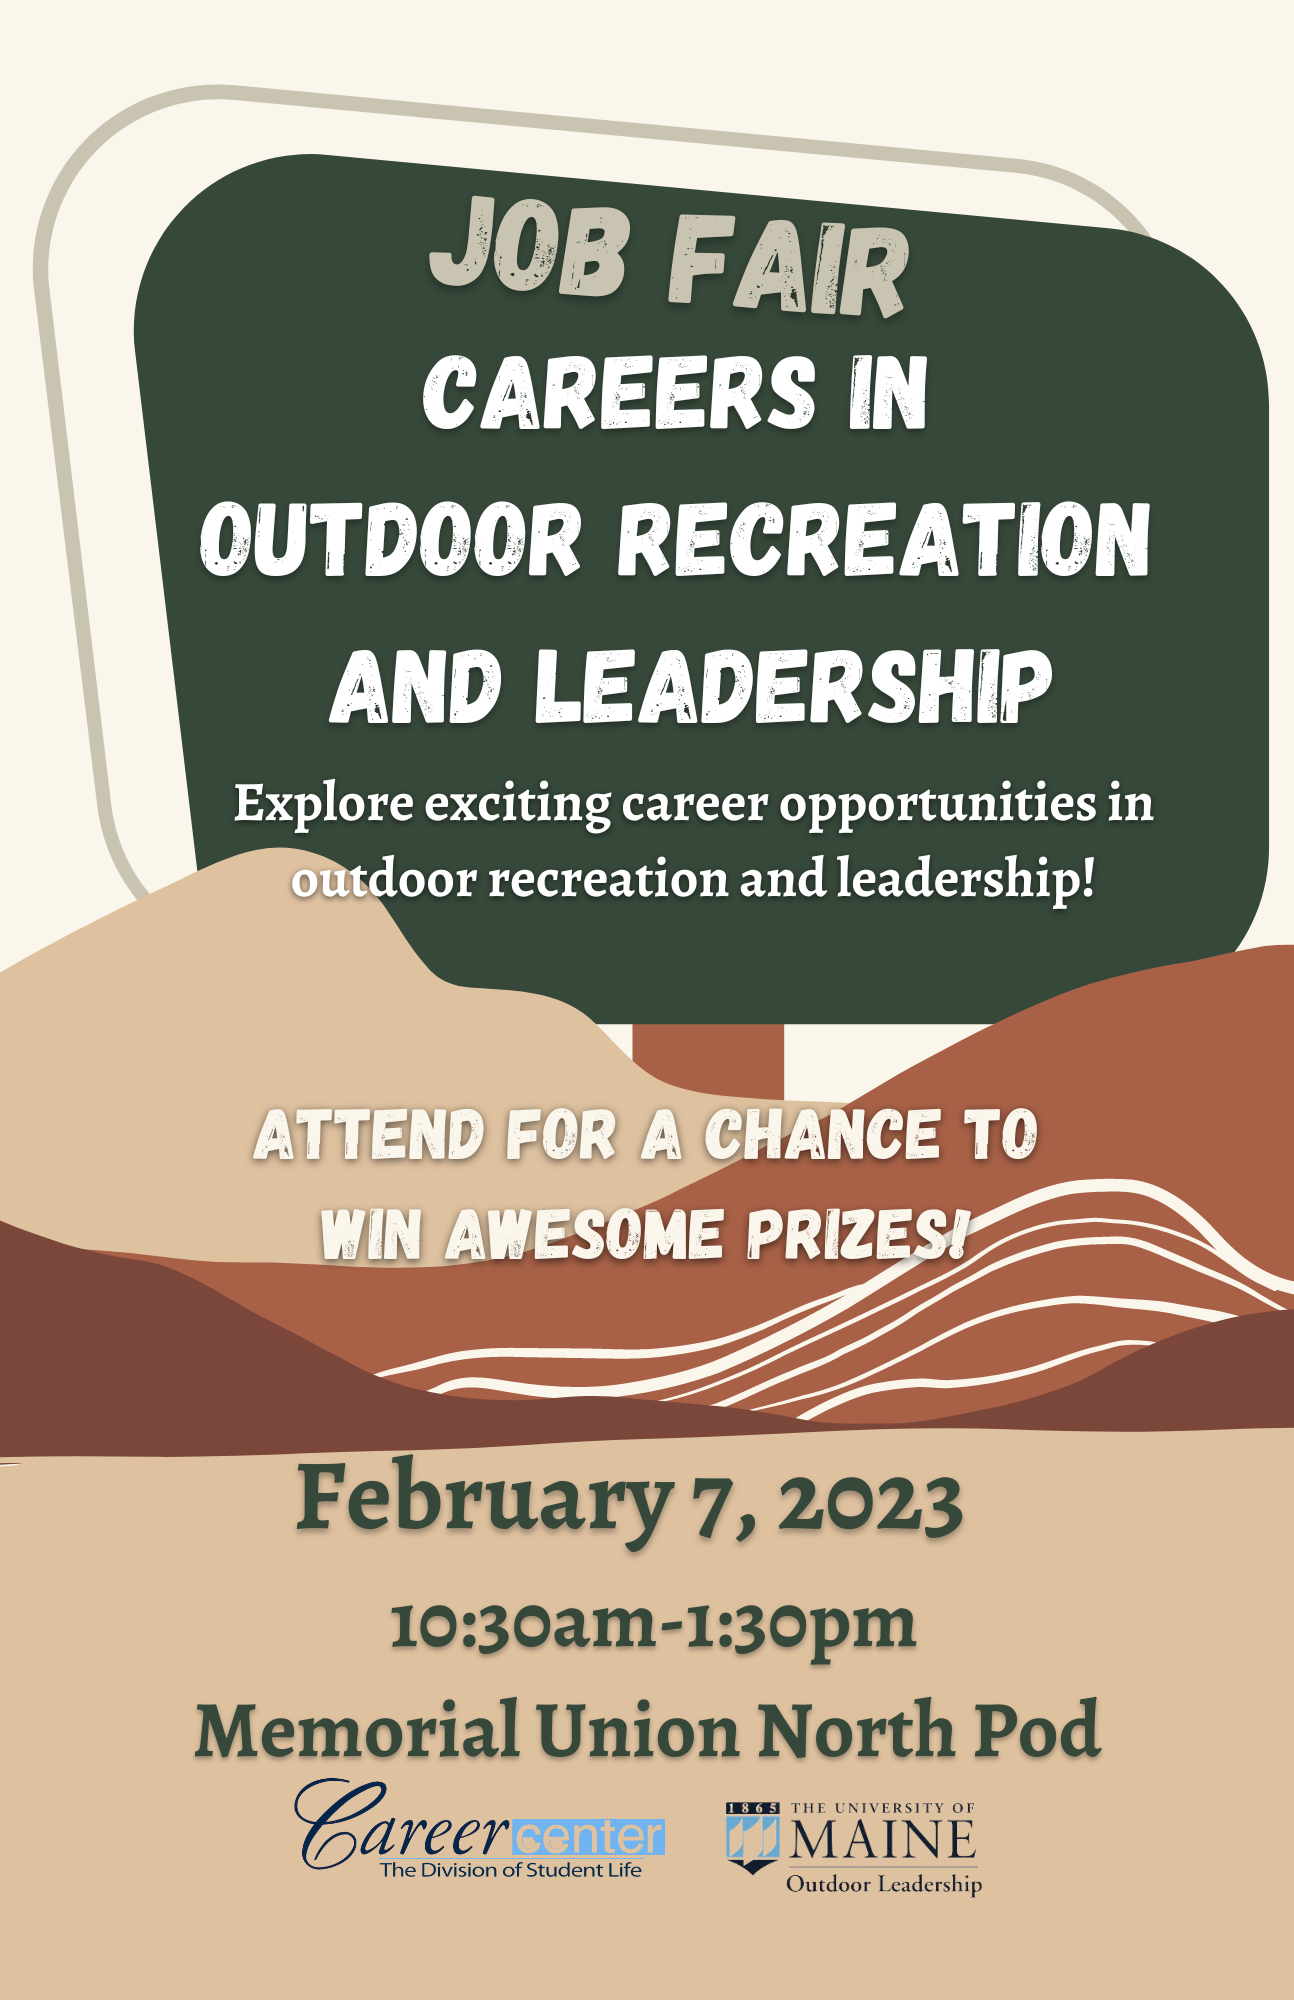 Careers in Outdoor Recreation and Leadership Job Fair - Career Center -  University of Maine